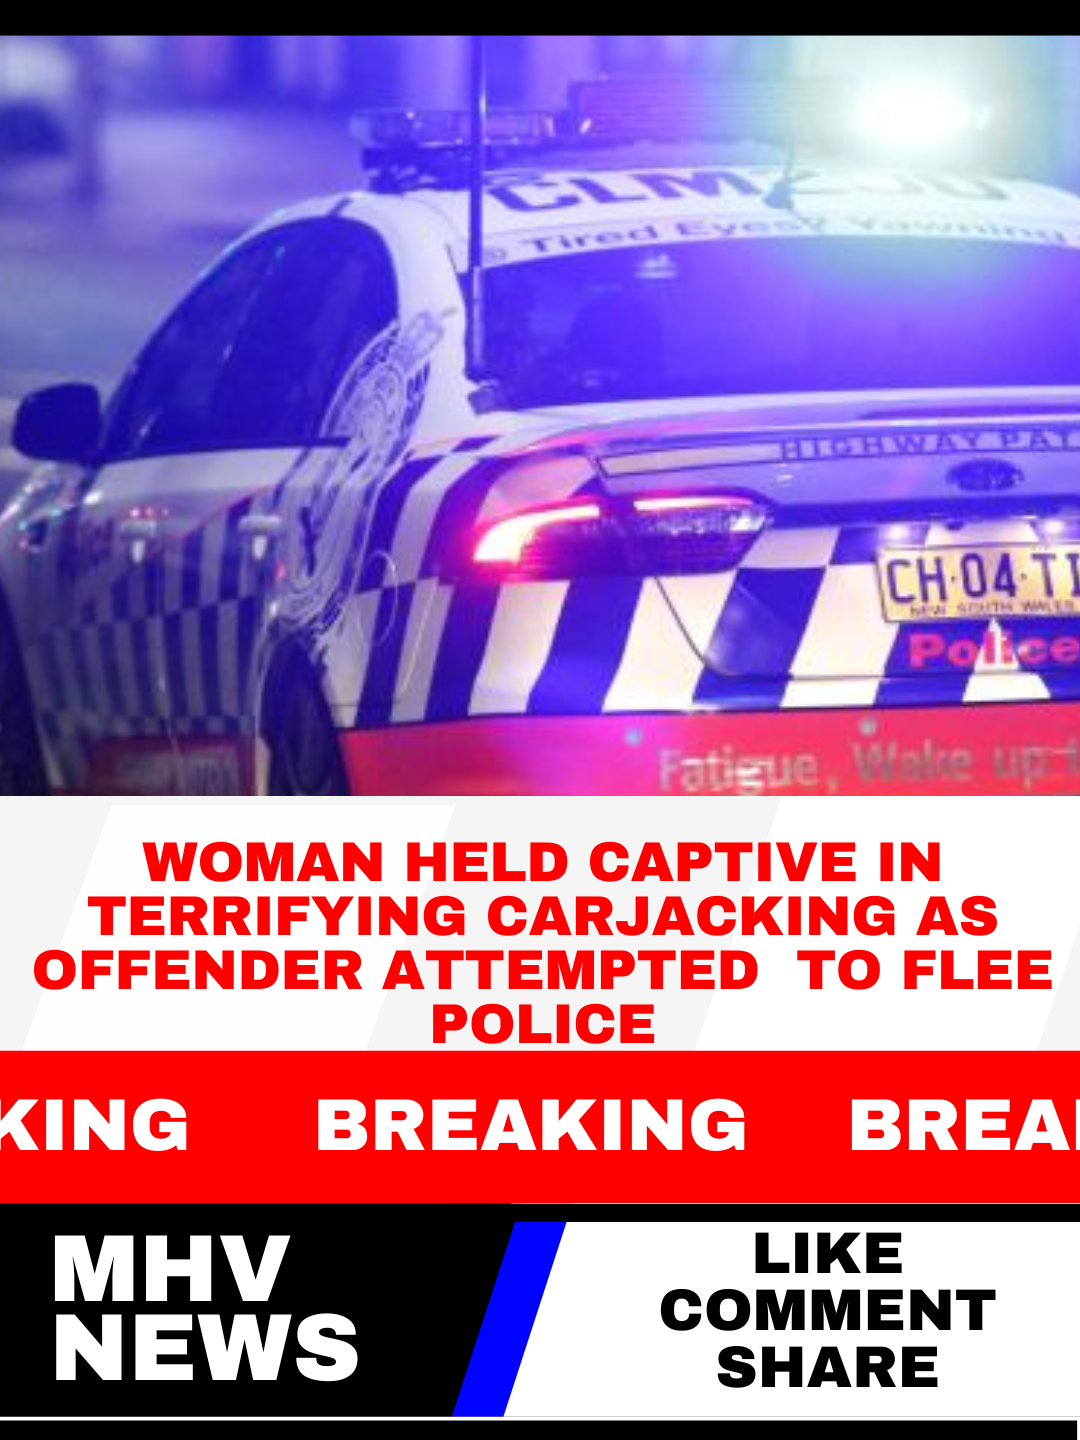 You are currently viewing Woman Held Captive in Terrifying Carjacking as Offender Attempted to Flee Police